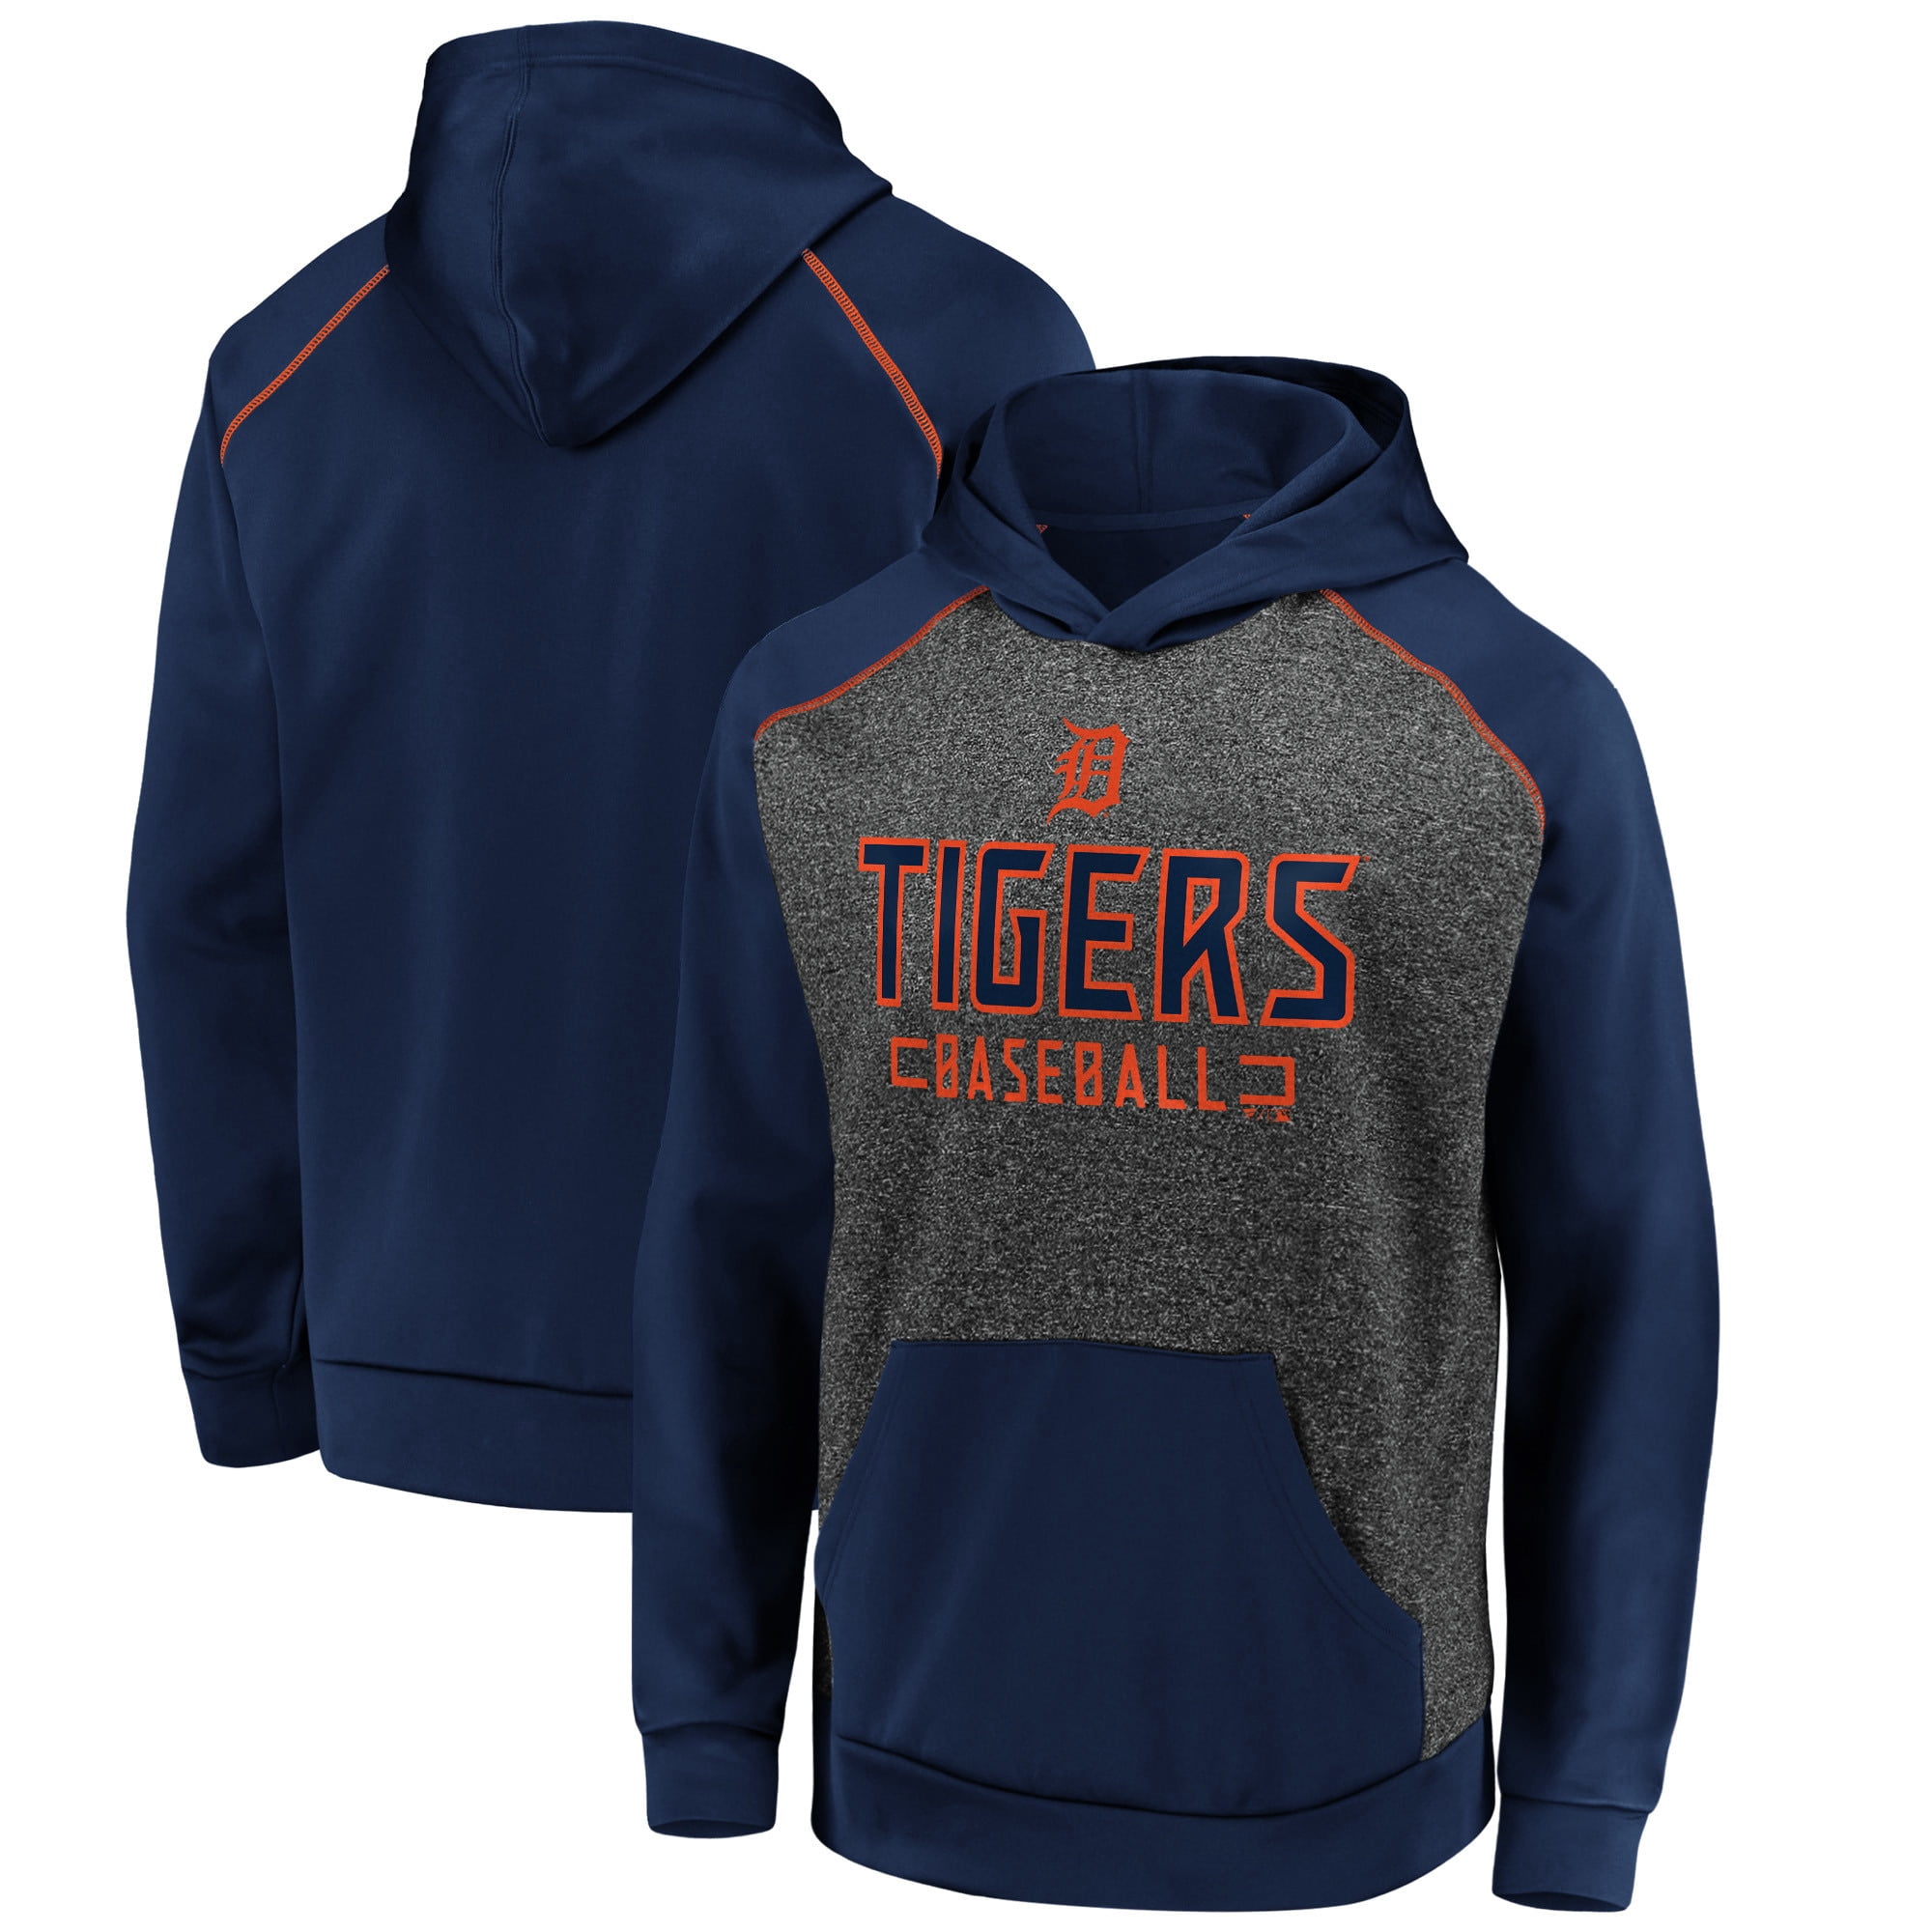 Men's Fanatics Branded Charcoal/Navy Detroit Tigers Game Day Ready